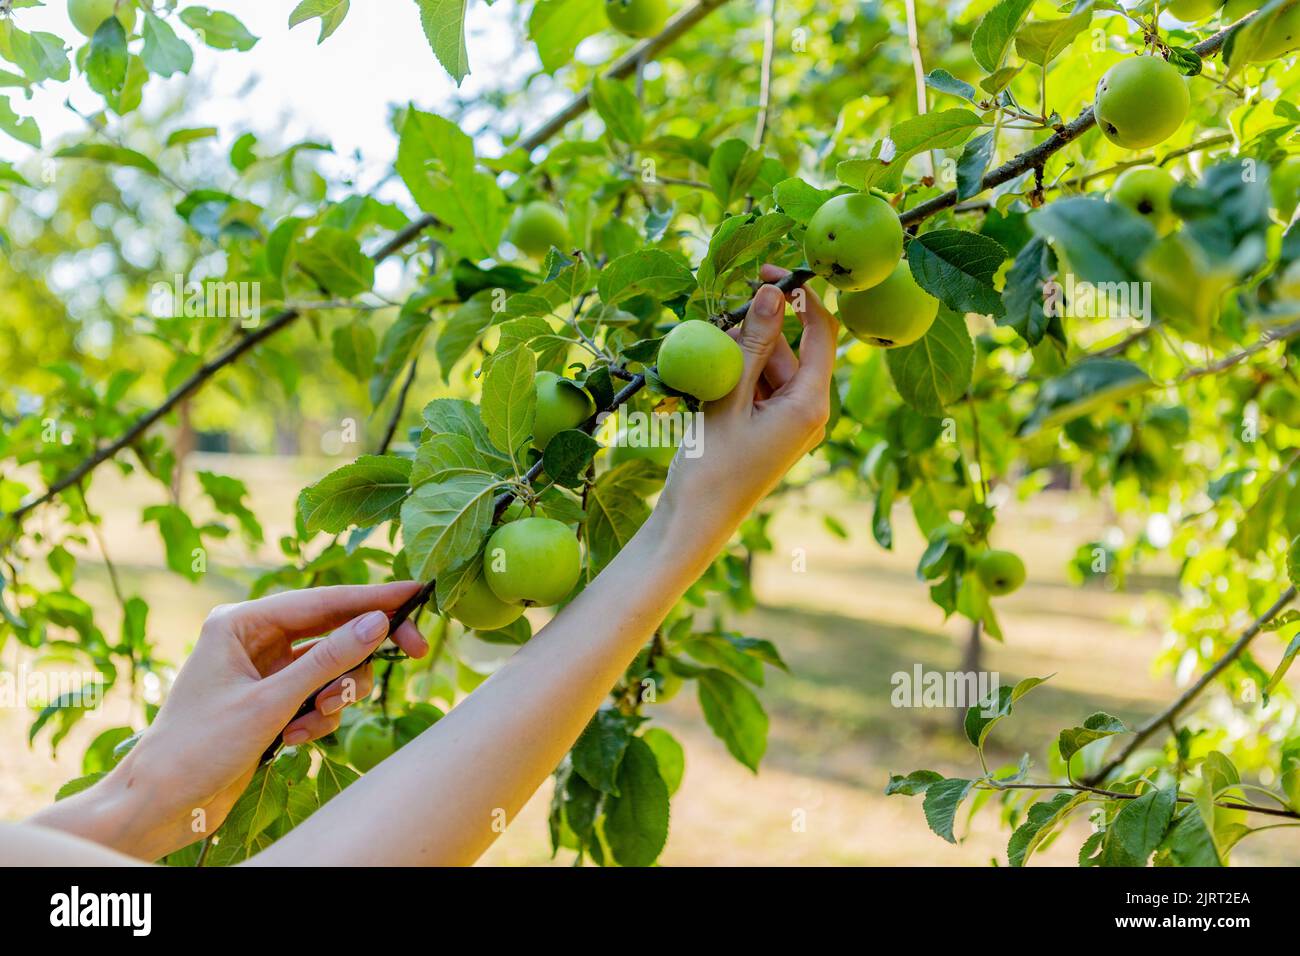 Two hands holding an apple tree brunch collecting green apples Stock Photo